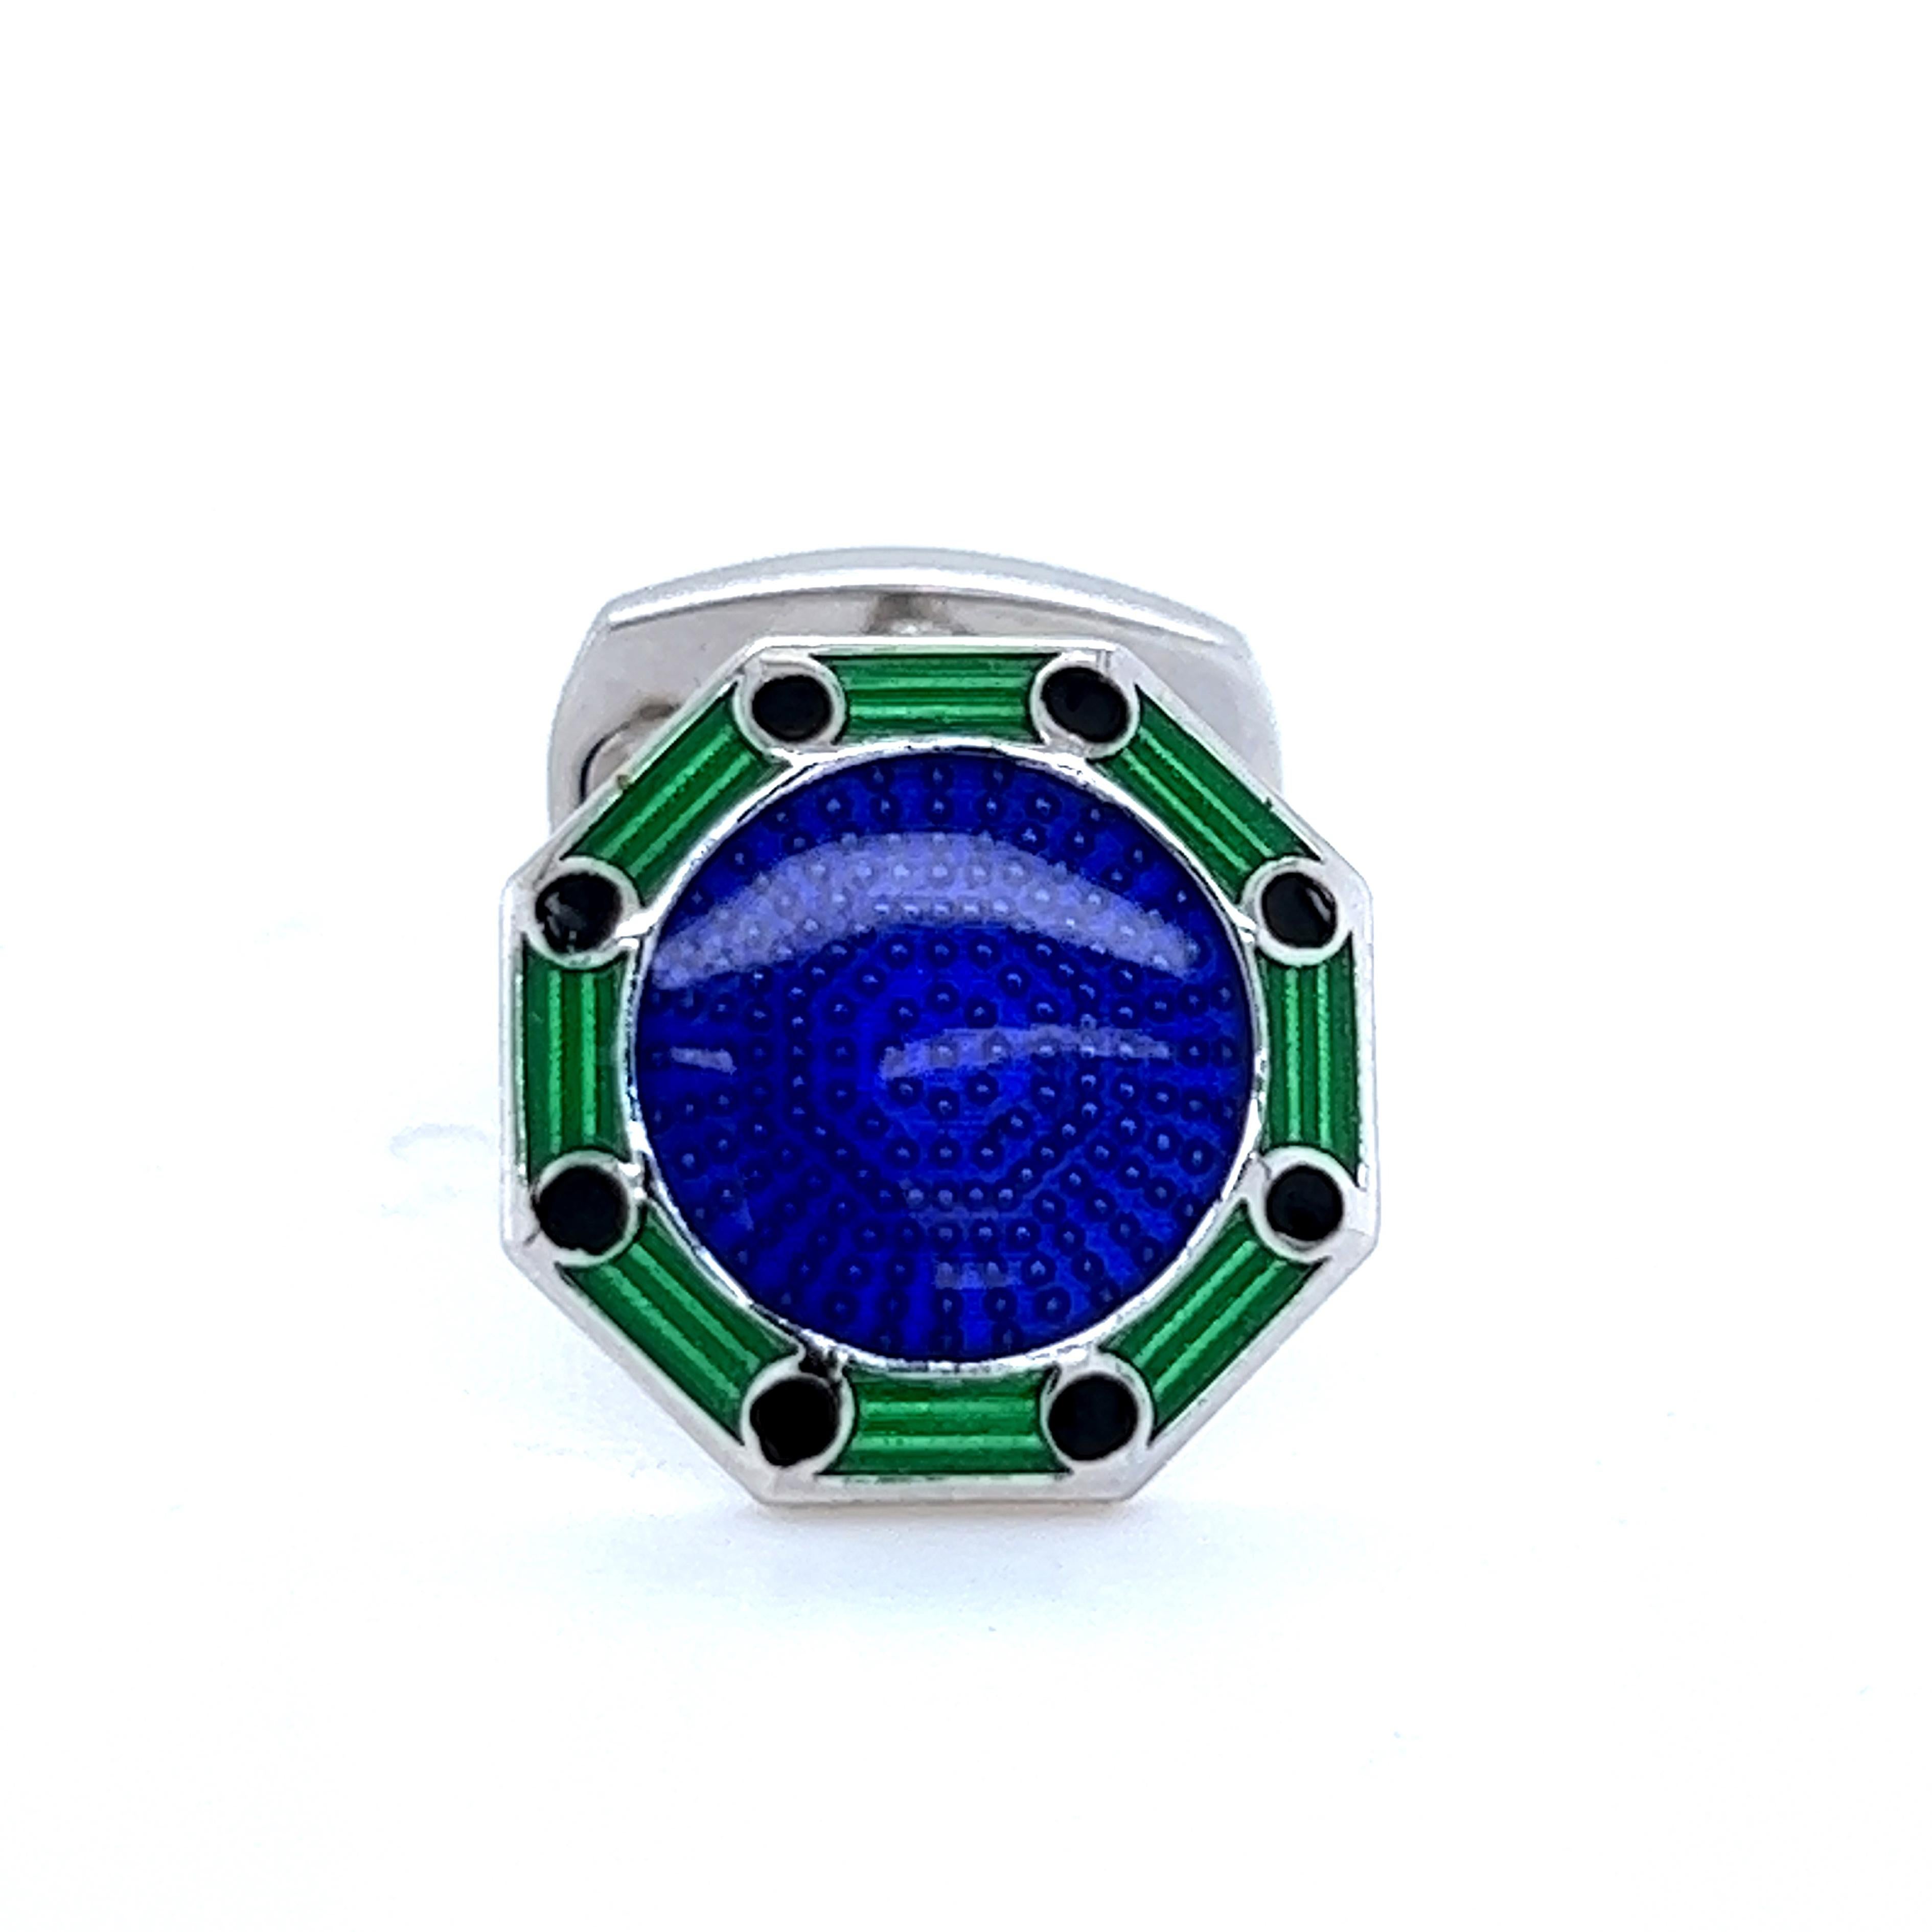 Chic yet Timeless Octagonal Green, Navy Blue, Little Black Dots Hand Enamelled Sterling Silver Cufflinks, T-bar back.
In our Smart Fitted Suede Leather Case and Pouch.

Front Diameter 0.55 inches.